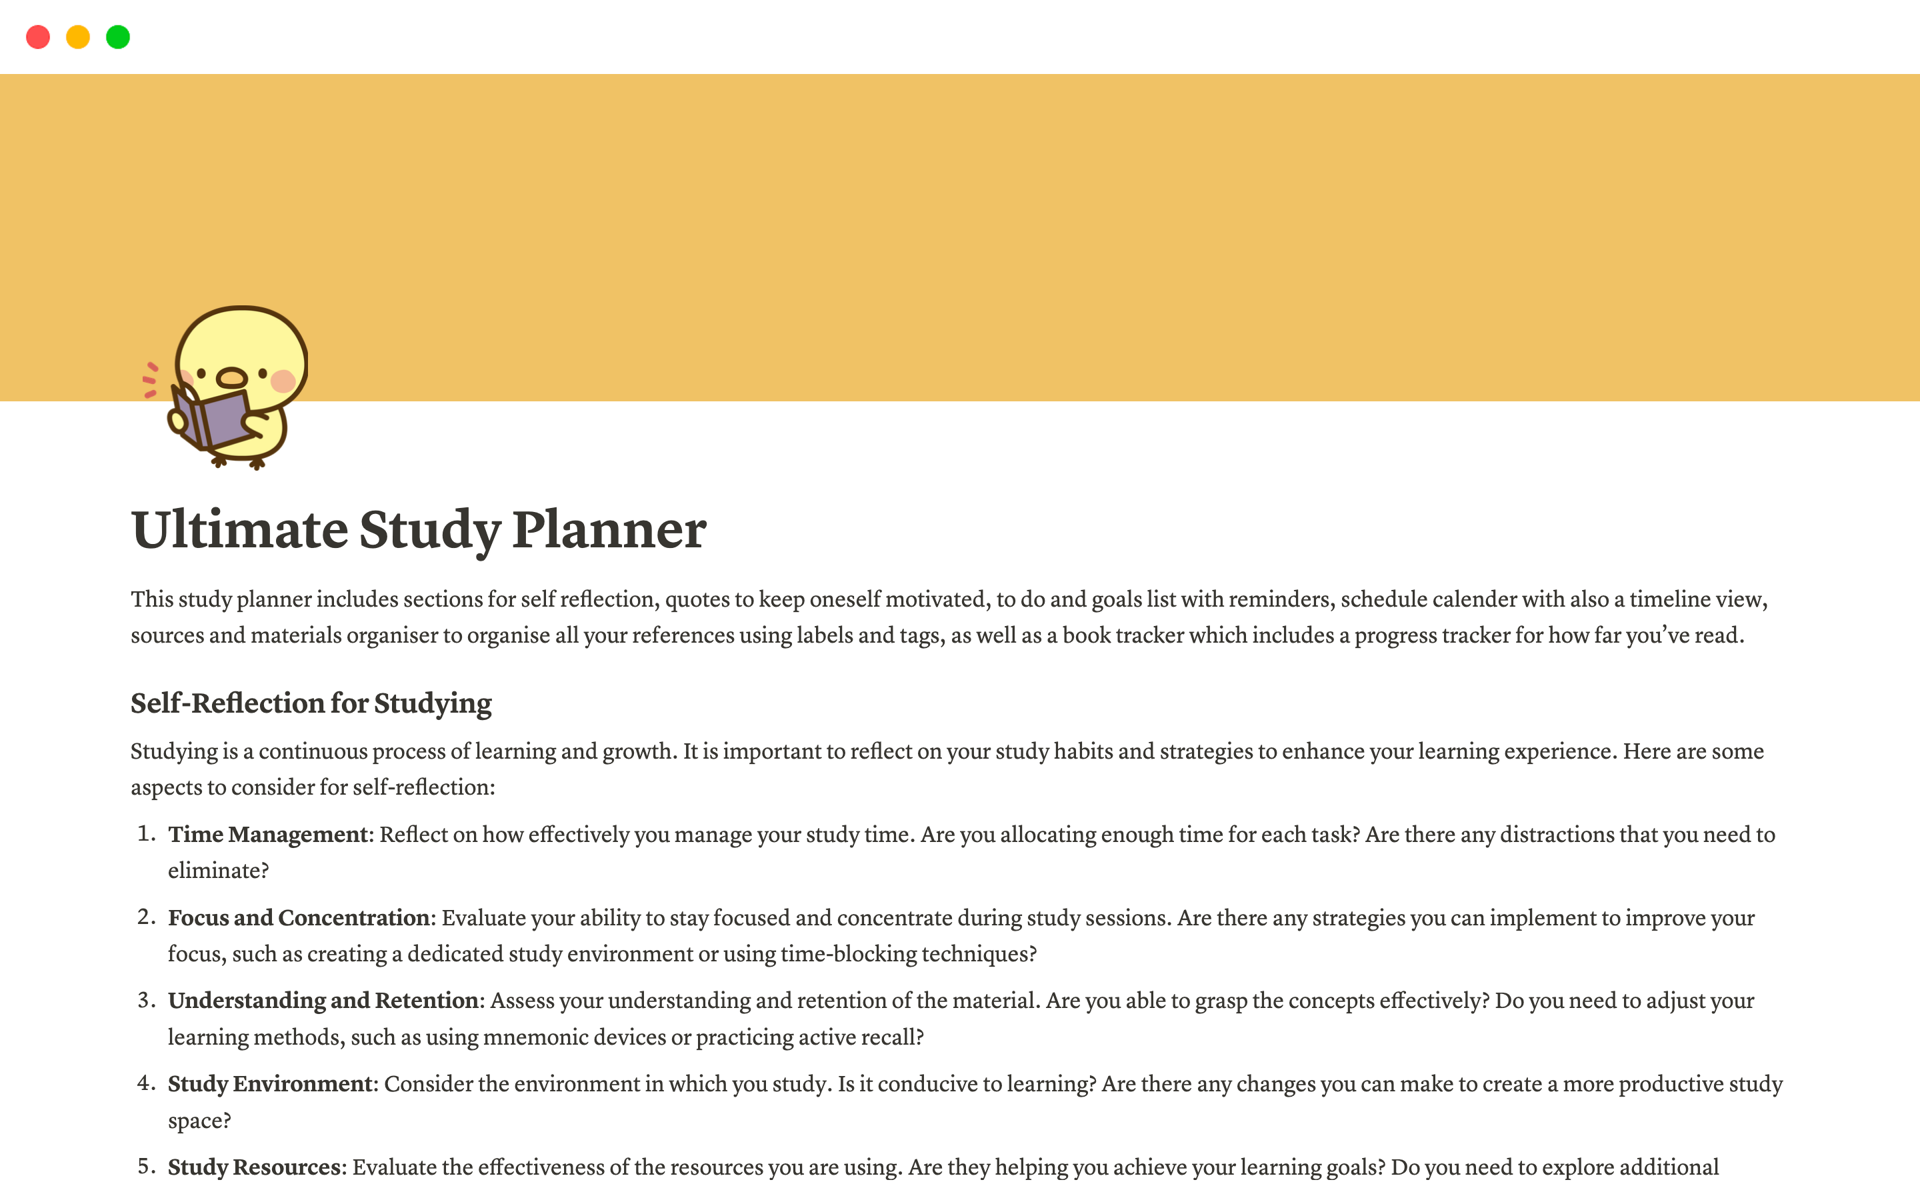 A study planner with all the essential tools you need to plan out your studies on time and efficiently, keeping everything organised.